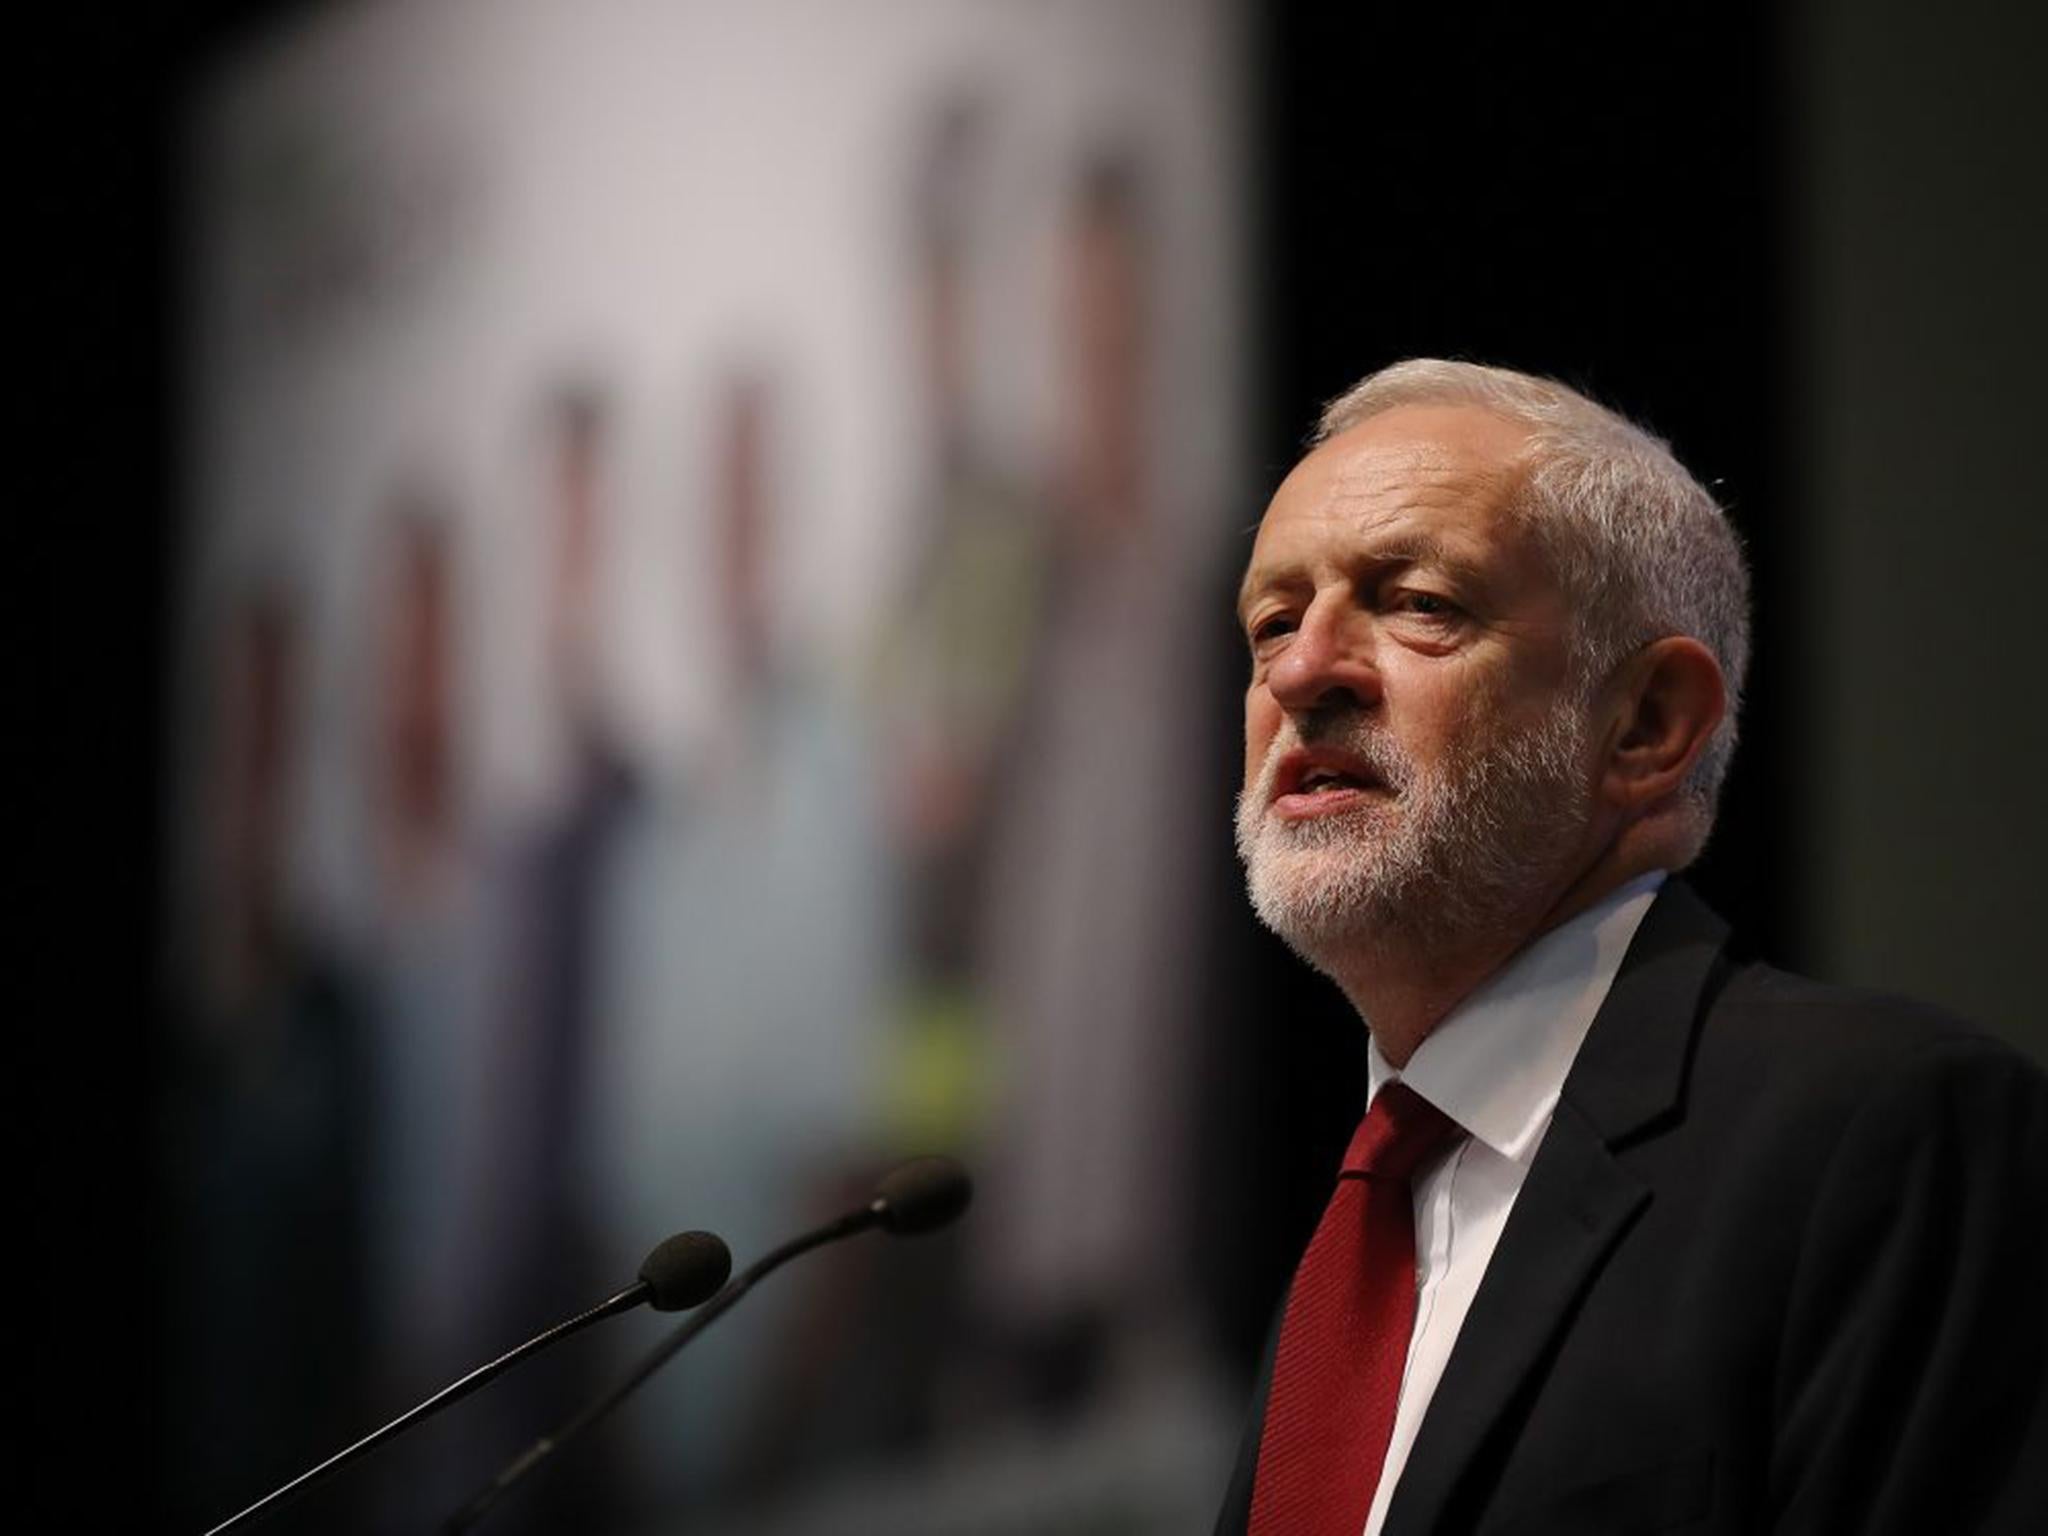 Labour leader Jeremy Corbyn speaks to delegates at the Unison Conference in Brighton